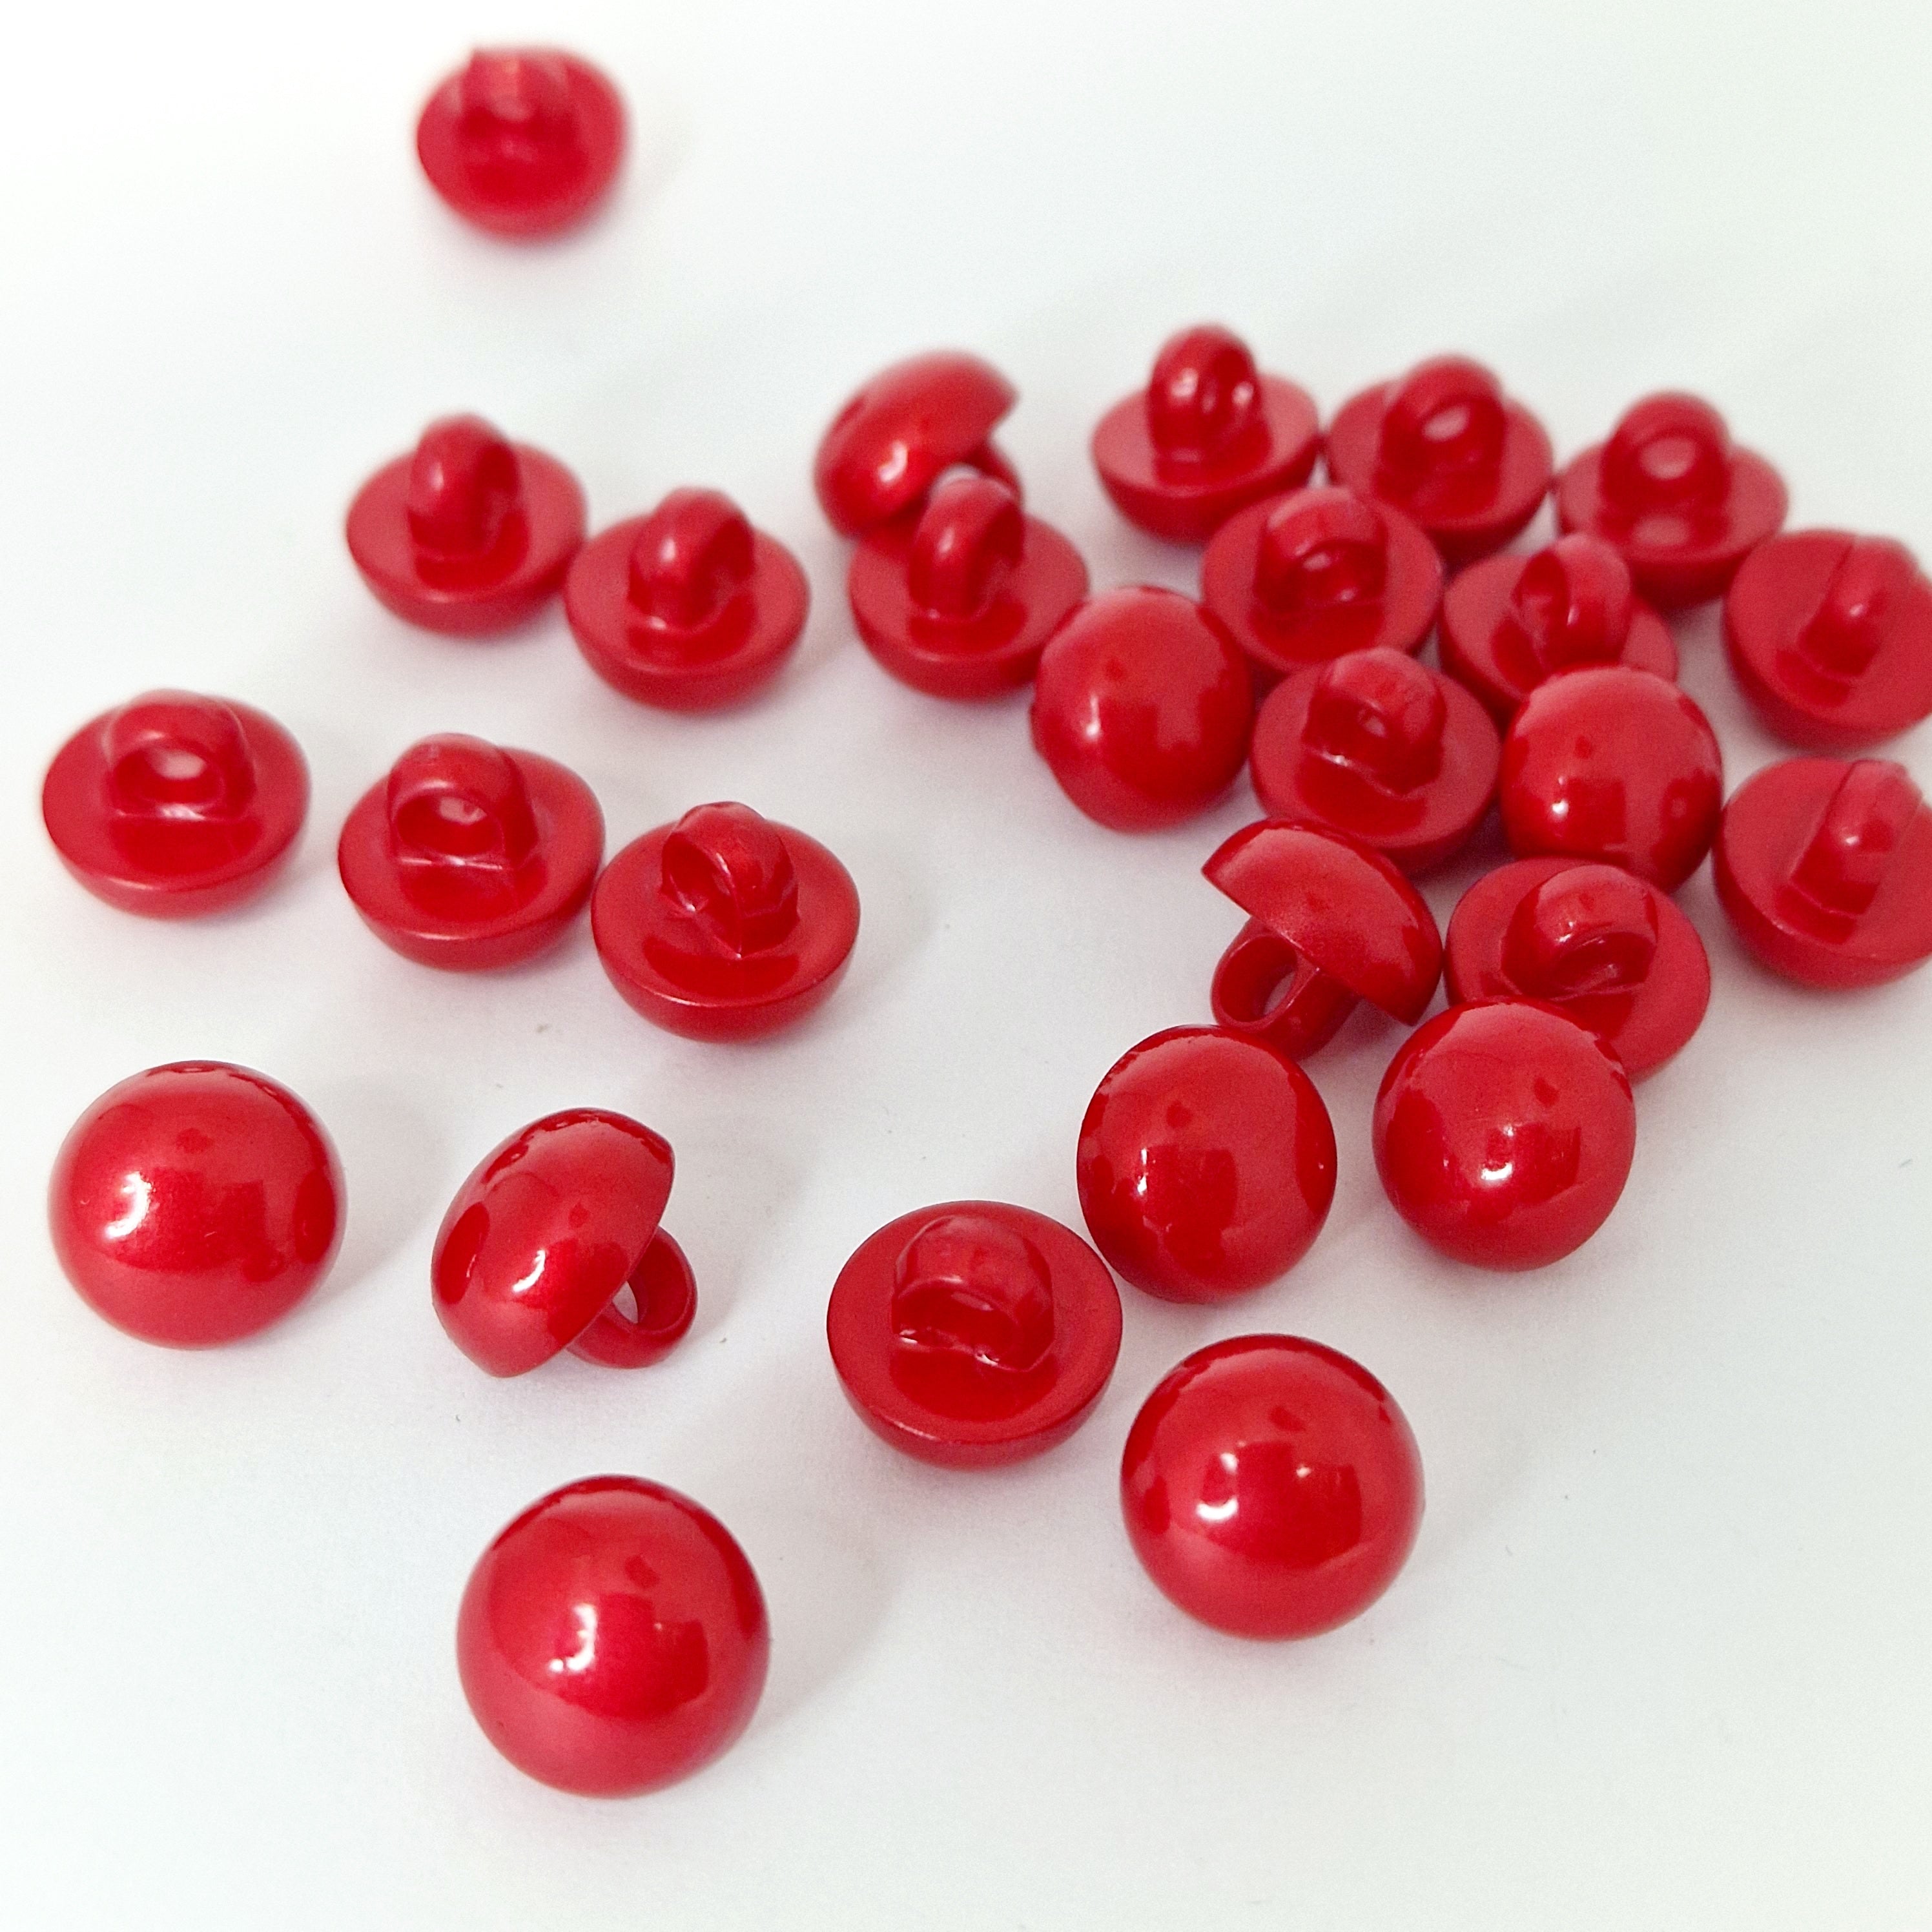 MajorCrafts 24pcs 11mm Red High-Grade Acrylic Small Round Sewing Mushroom Shank Buttons